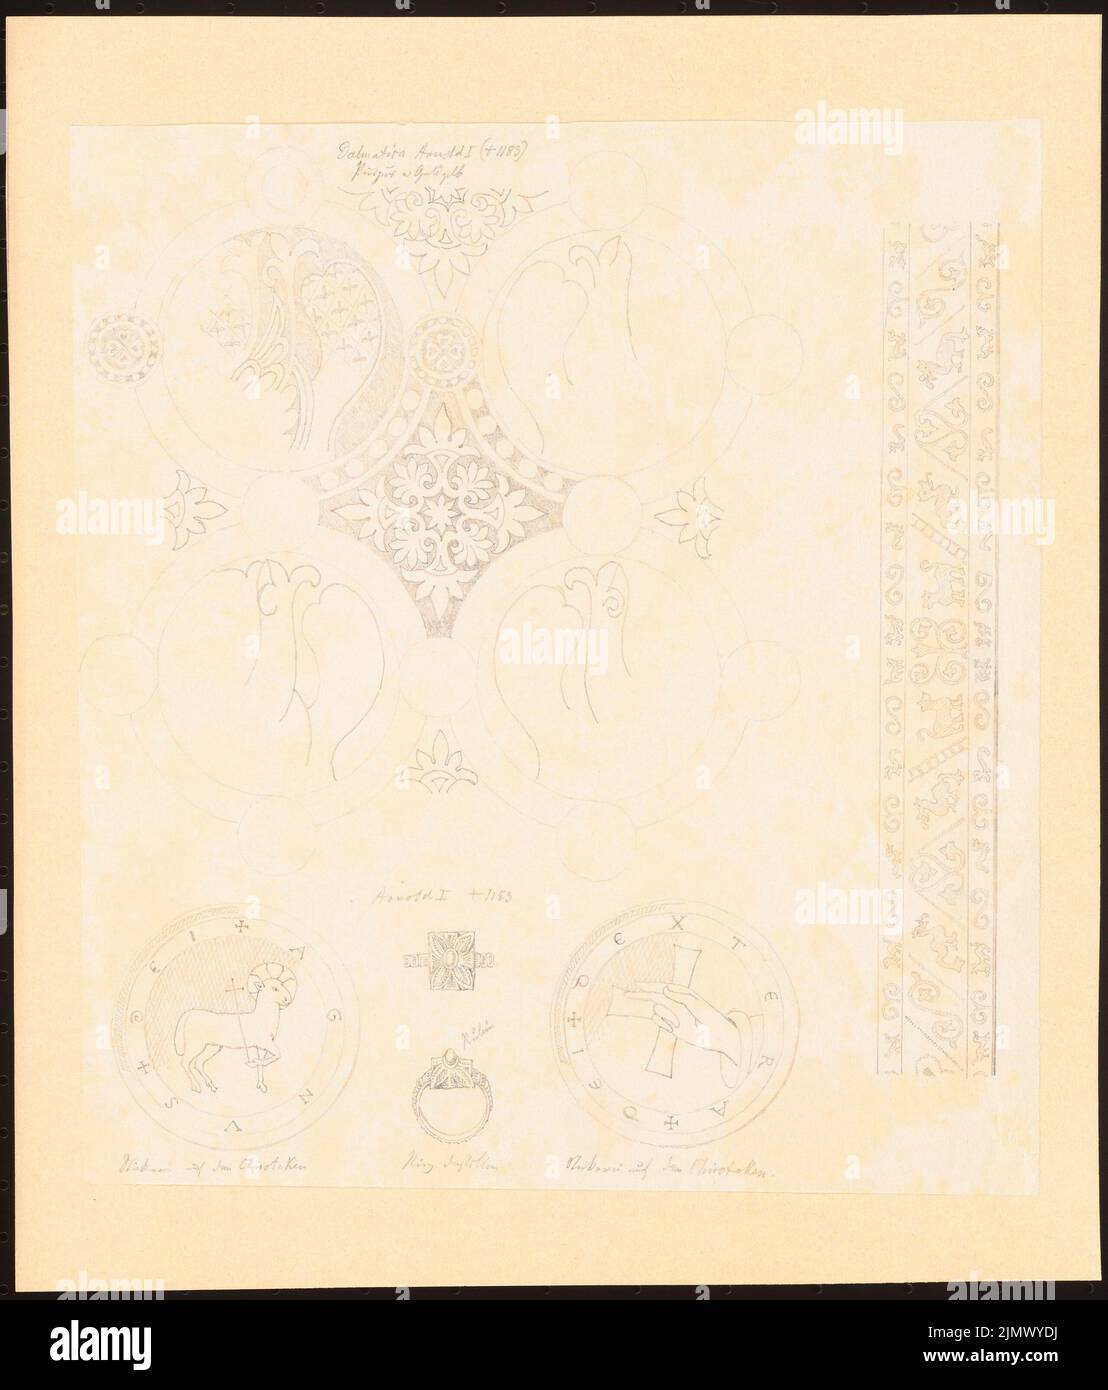 Quast Ferdinand von (1807-1877), Dalmatica and other bishopsattribute of the Arnold I to Trier (without date): View of the floral pattern of the tunicella in purple and golden yellow, frieze with palmette, dragon and other animal motifs, two views of the Bish. Pencil on paper, 34.7 x 29.6 cm (including scan edges) Quast Ferdinand von  (1807-1877): Dalmatica und weitere Bischofsattribute des Arnold I. von Trier Stock Photo